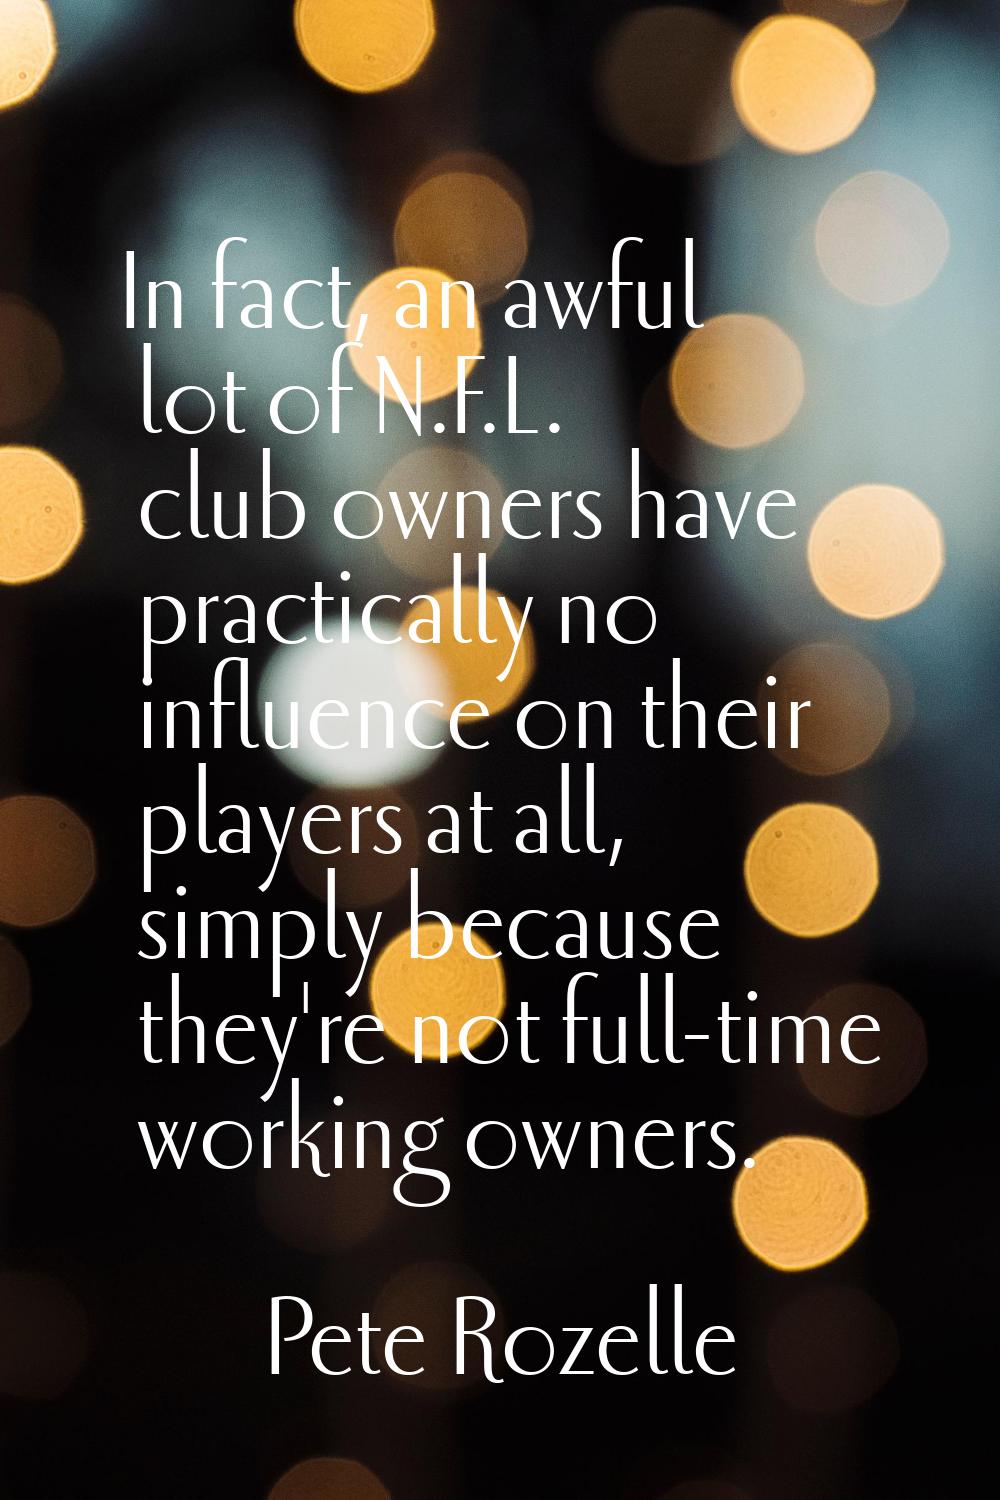 In fact, an awful lot of N.F.L. club owners have practically no influence on their players at all, 